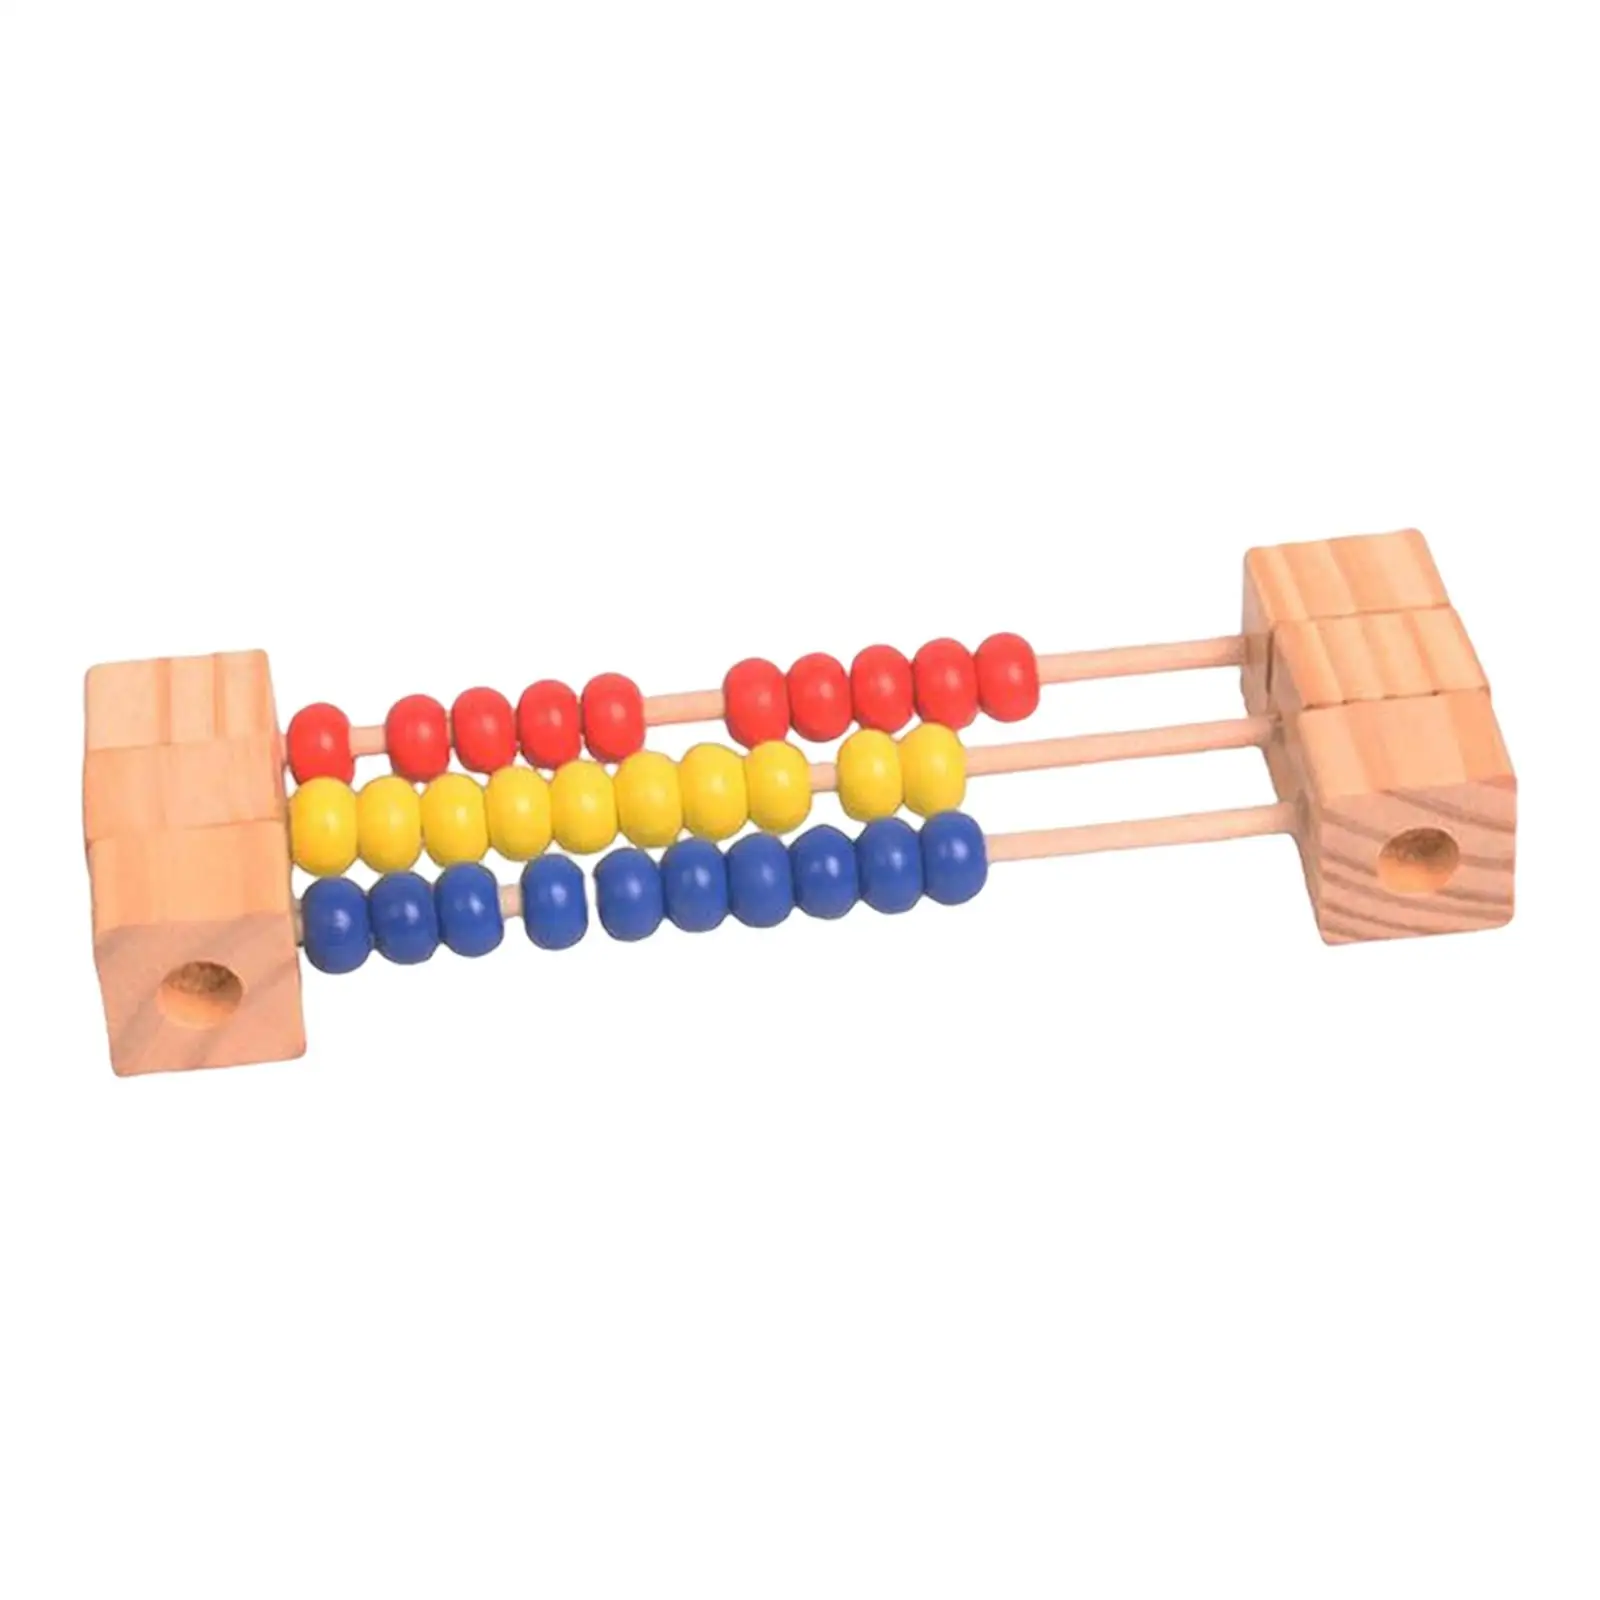 Wooden Abacus Counting Game Multiplication Table Board Game for Boys Toddlers Kids